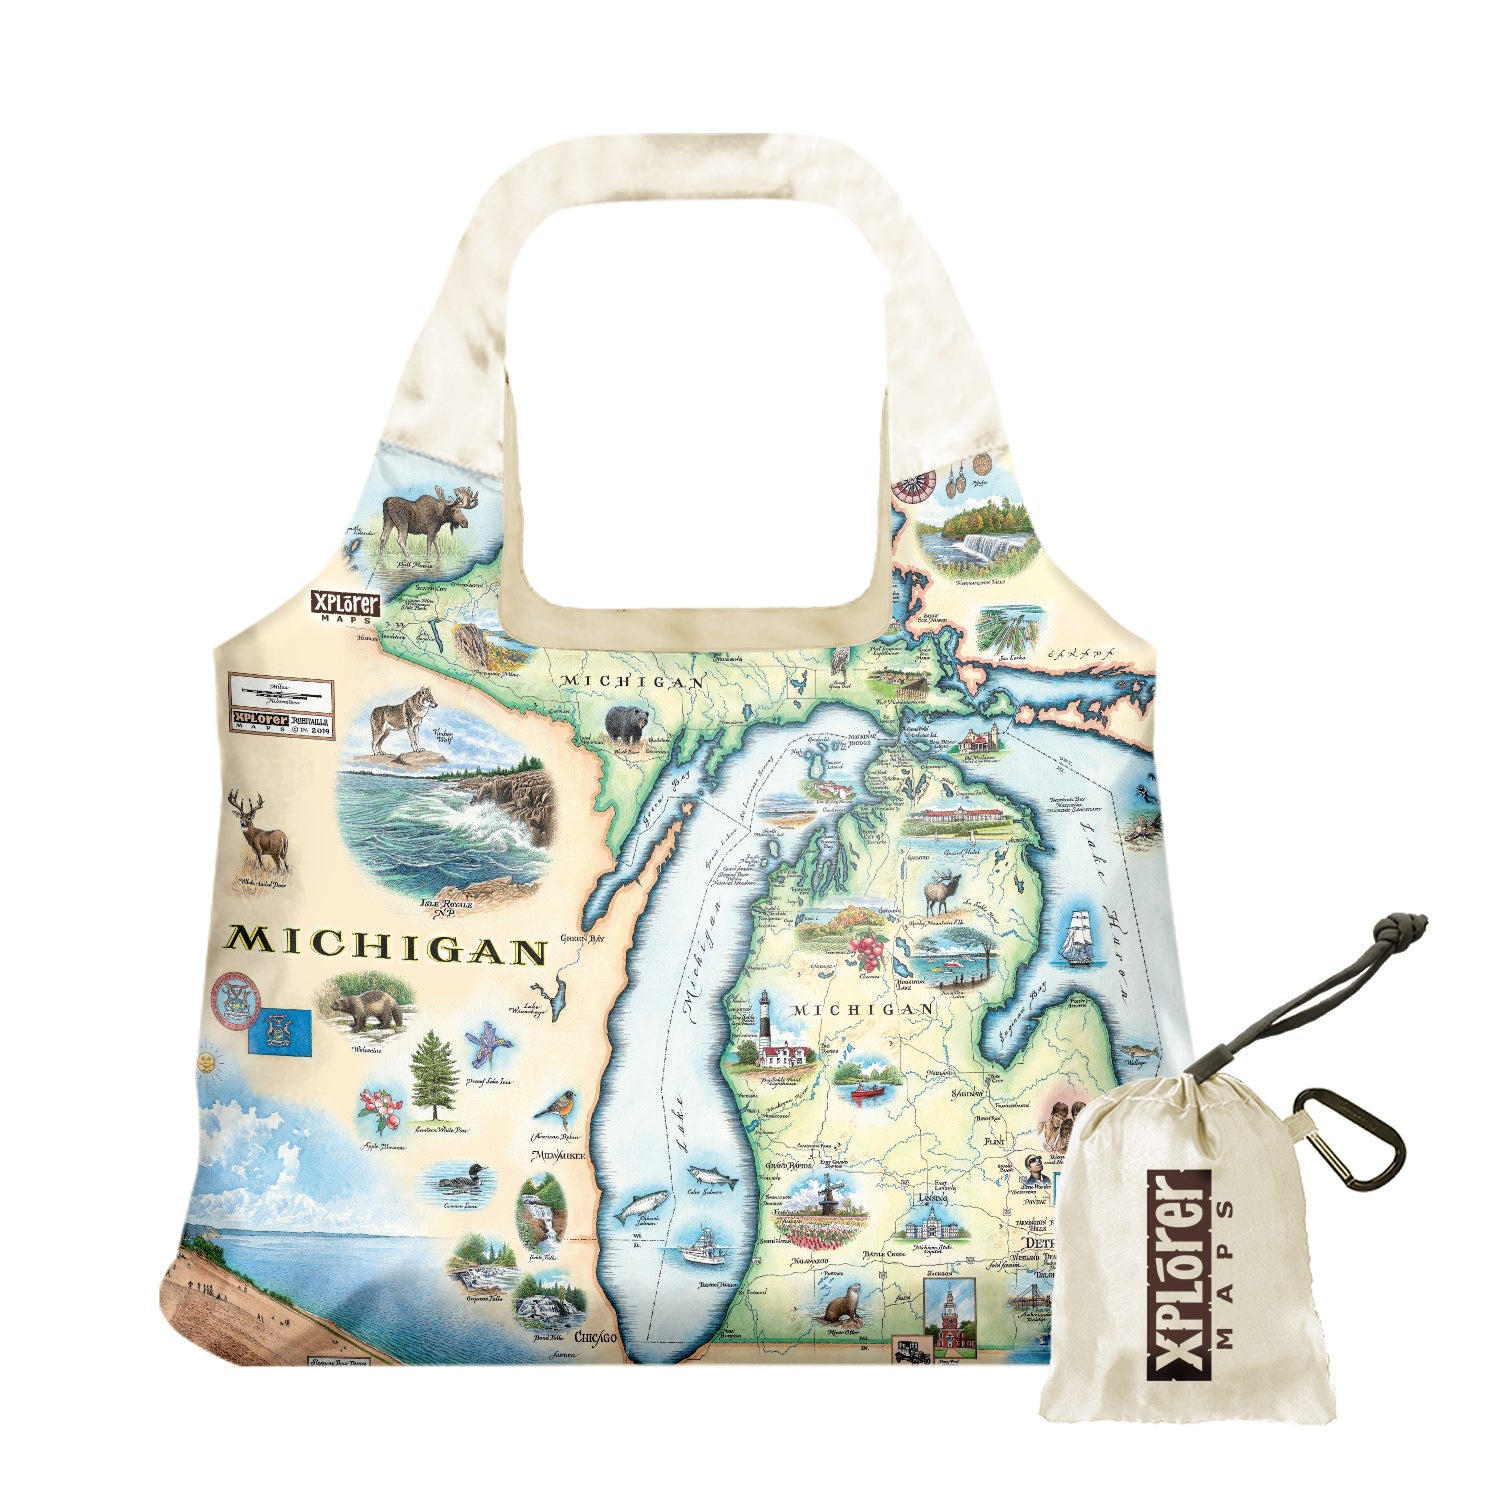 Michigan Pouch Tote Bags by Xplorer Maps. Featuring the Great Lakes, Detroit, Ann Arbor, Grand Rapids, and Lansing. The Print also features Nature, animals, ducks, deer, fish, moose lighthouses, wolverines, and the Mackinac Bridge.